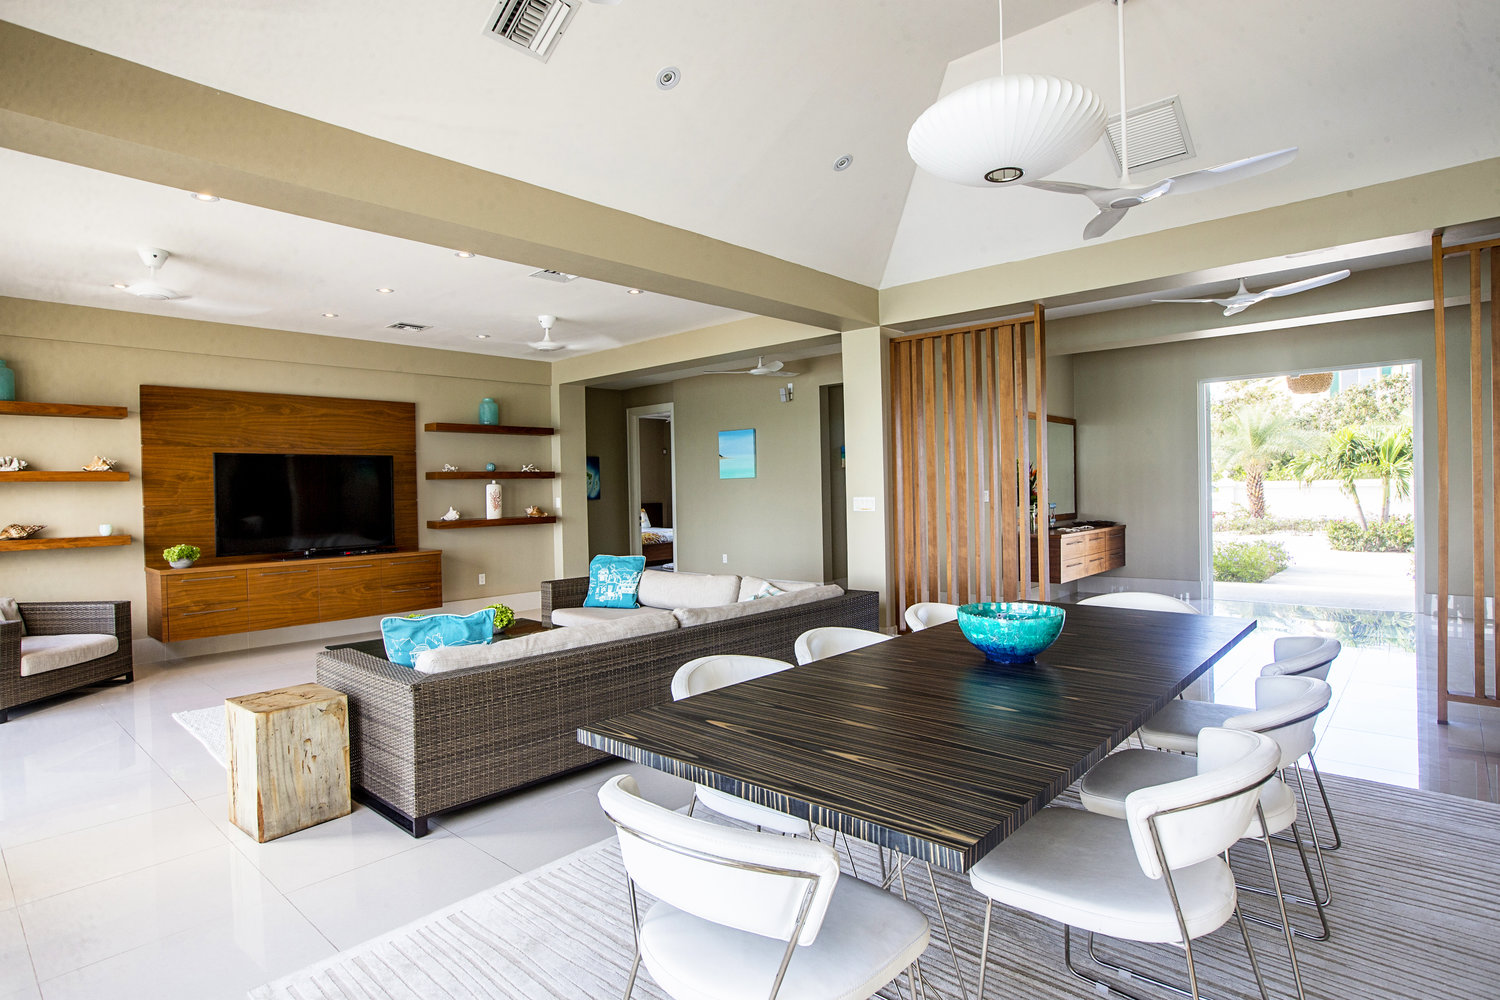 Open concept indoor space with beach style.